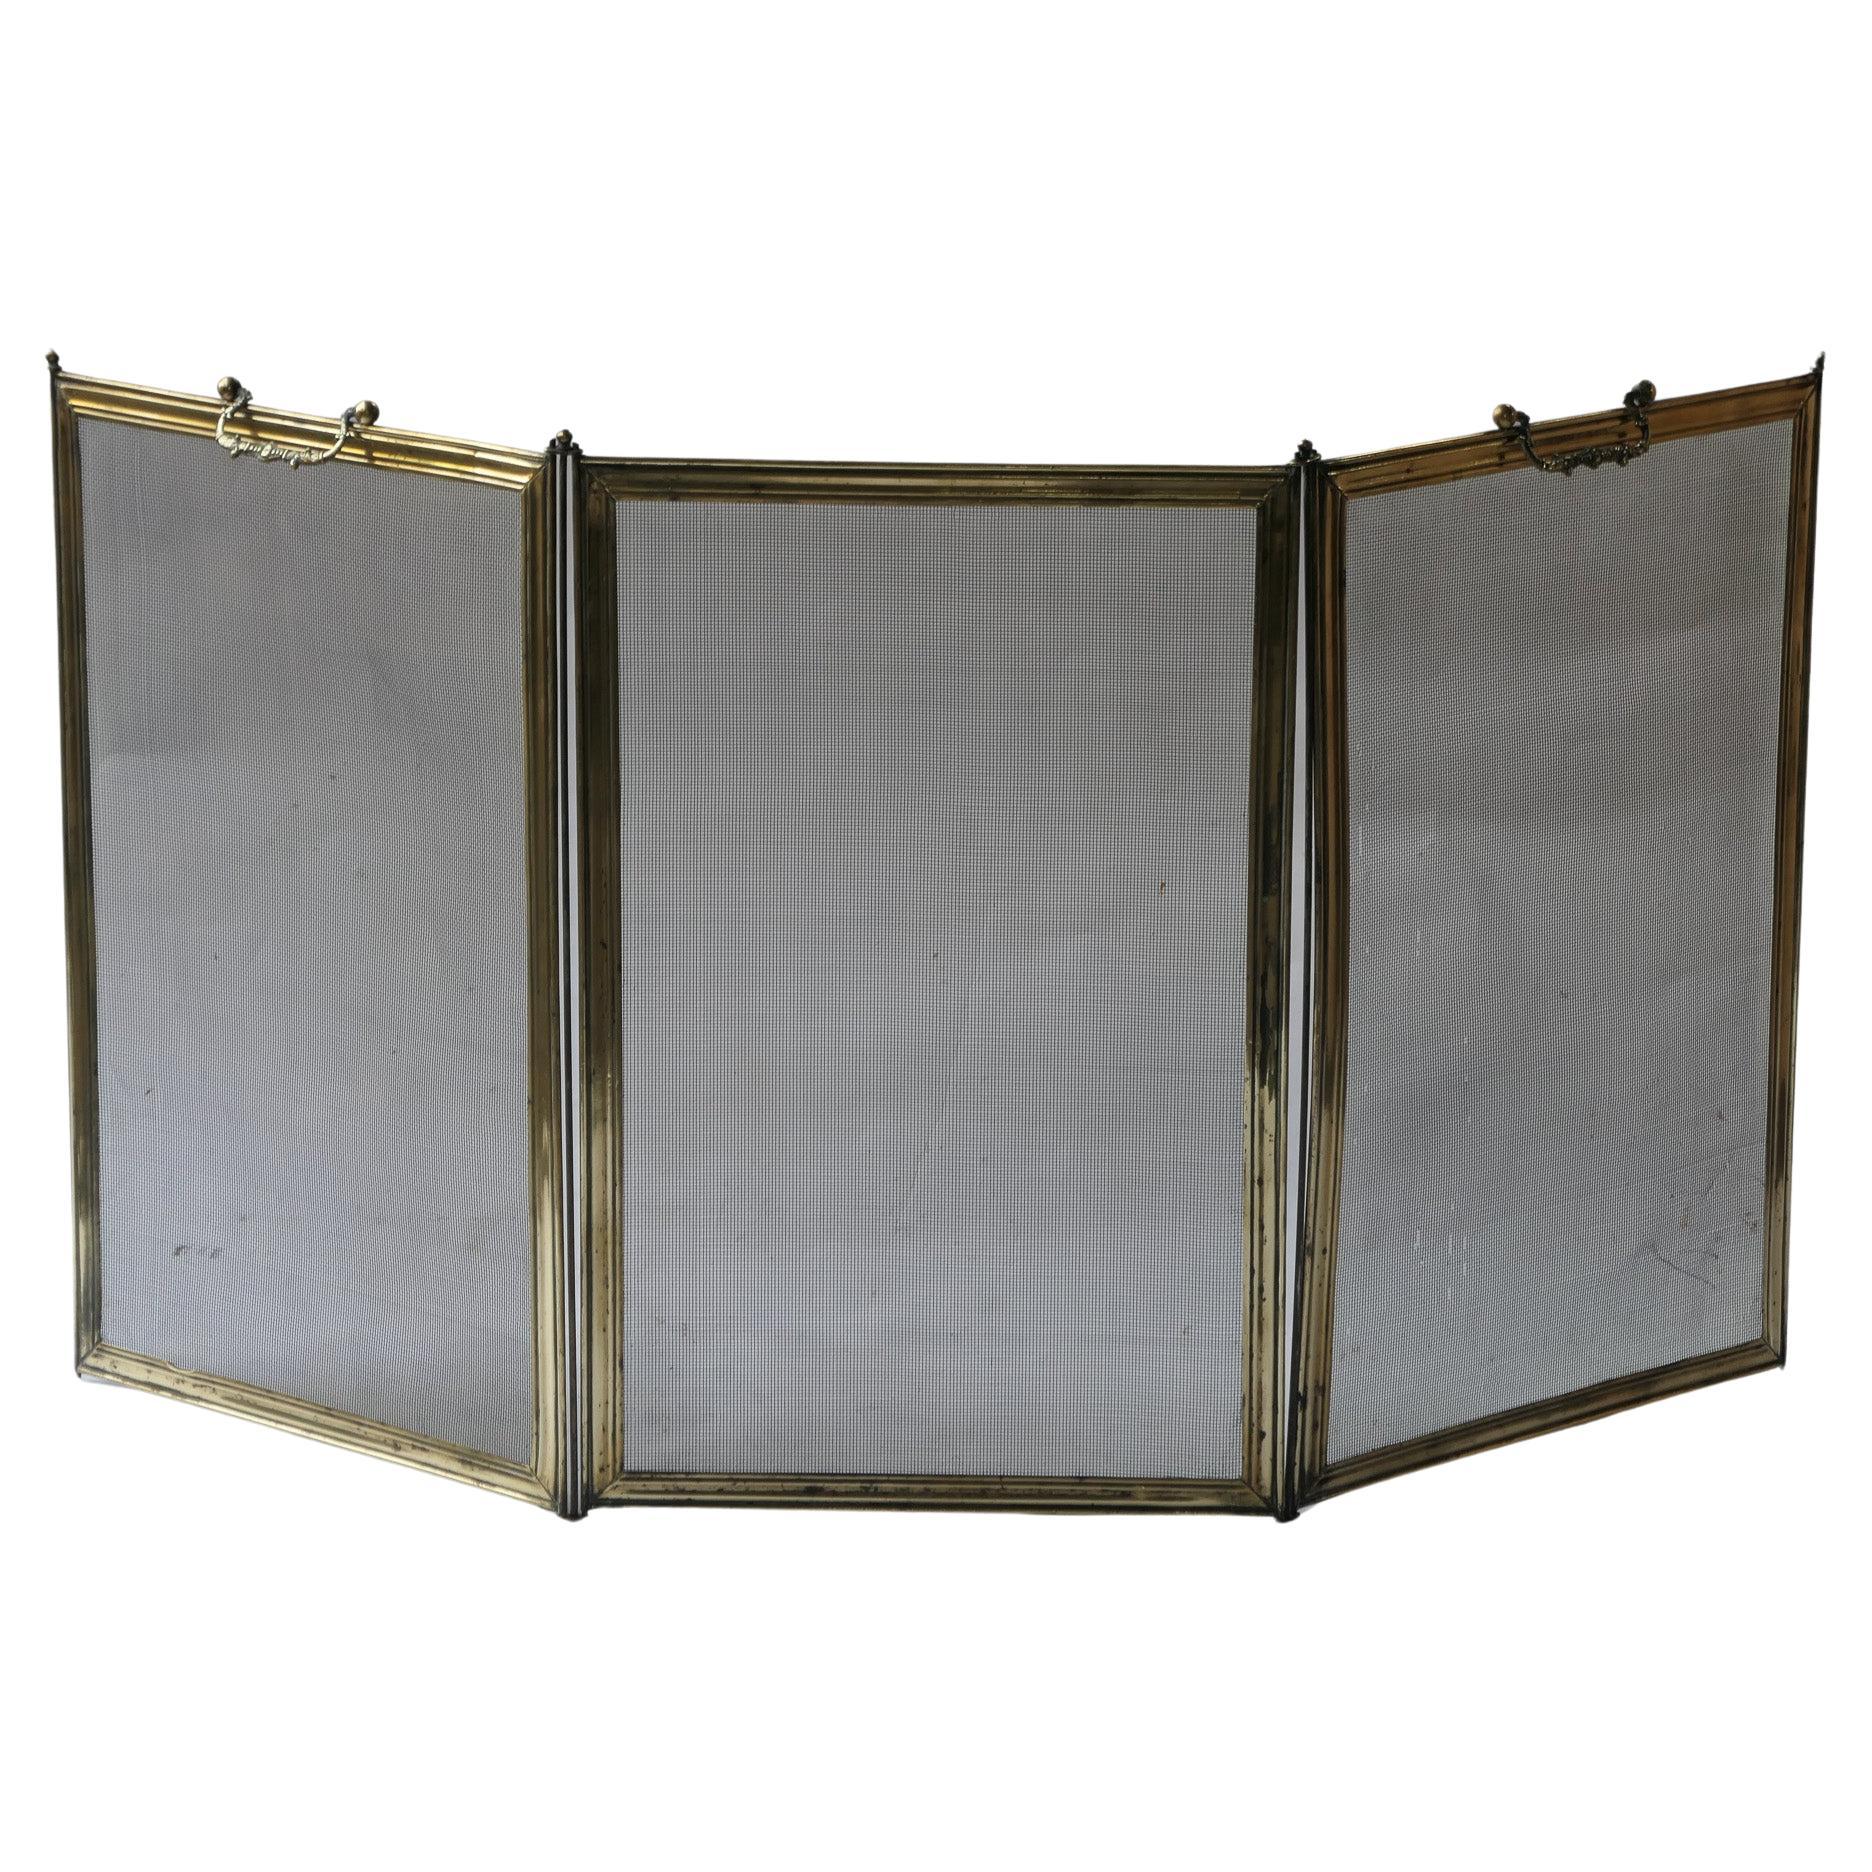 Antique French Polished Brass Napoleon III Fire Screen, 19th Century For Sale